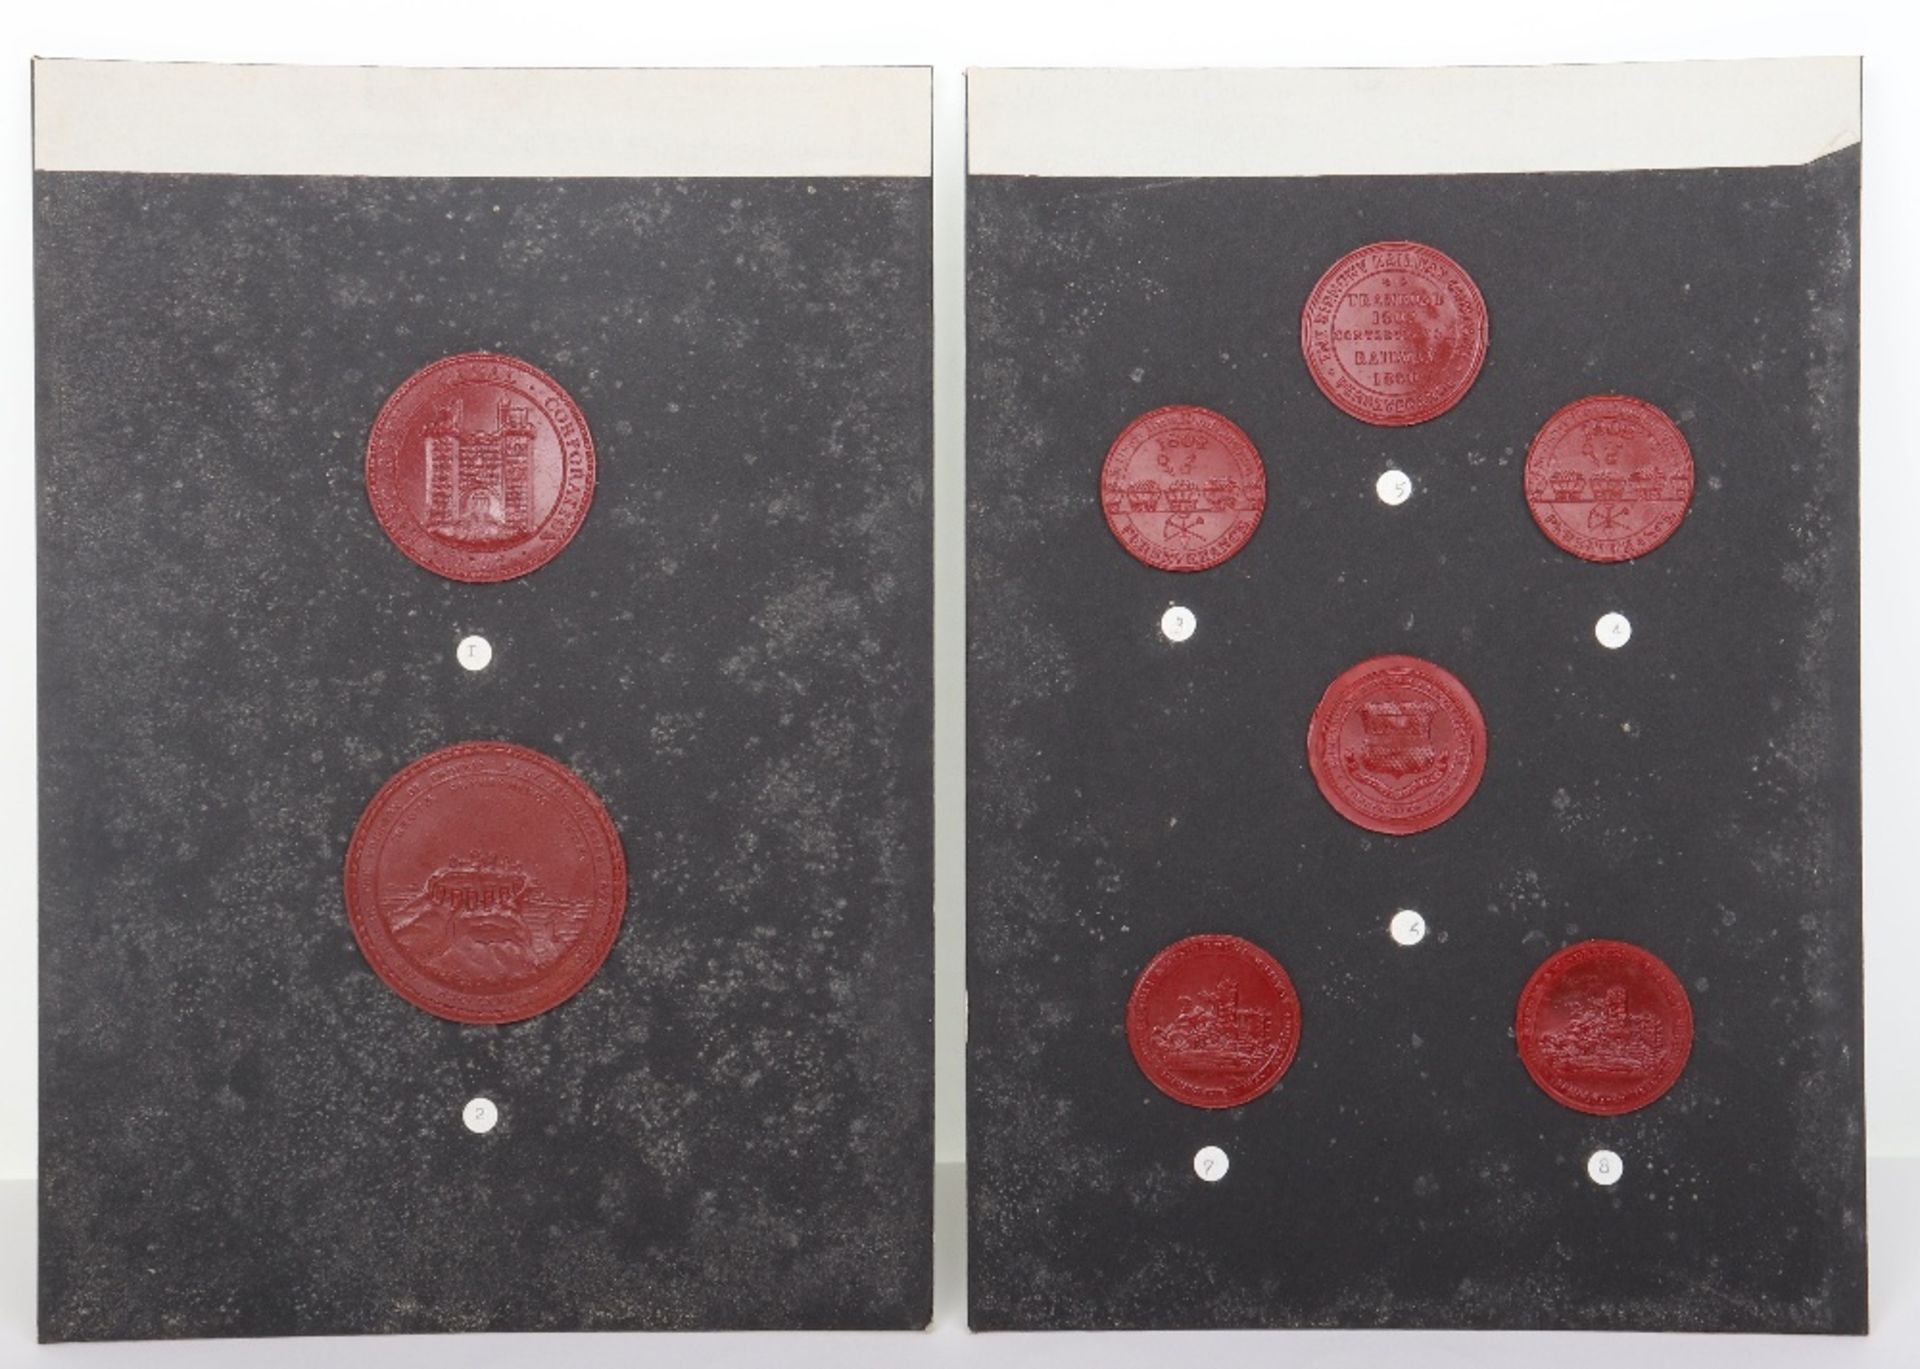 A fine selection of 18th and 19th century wax seal impressions of Railway and Canal company seals